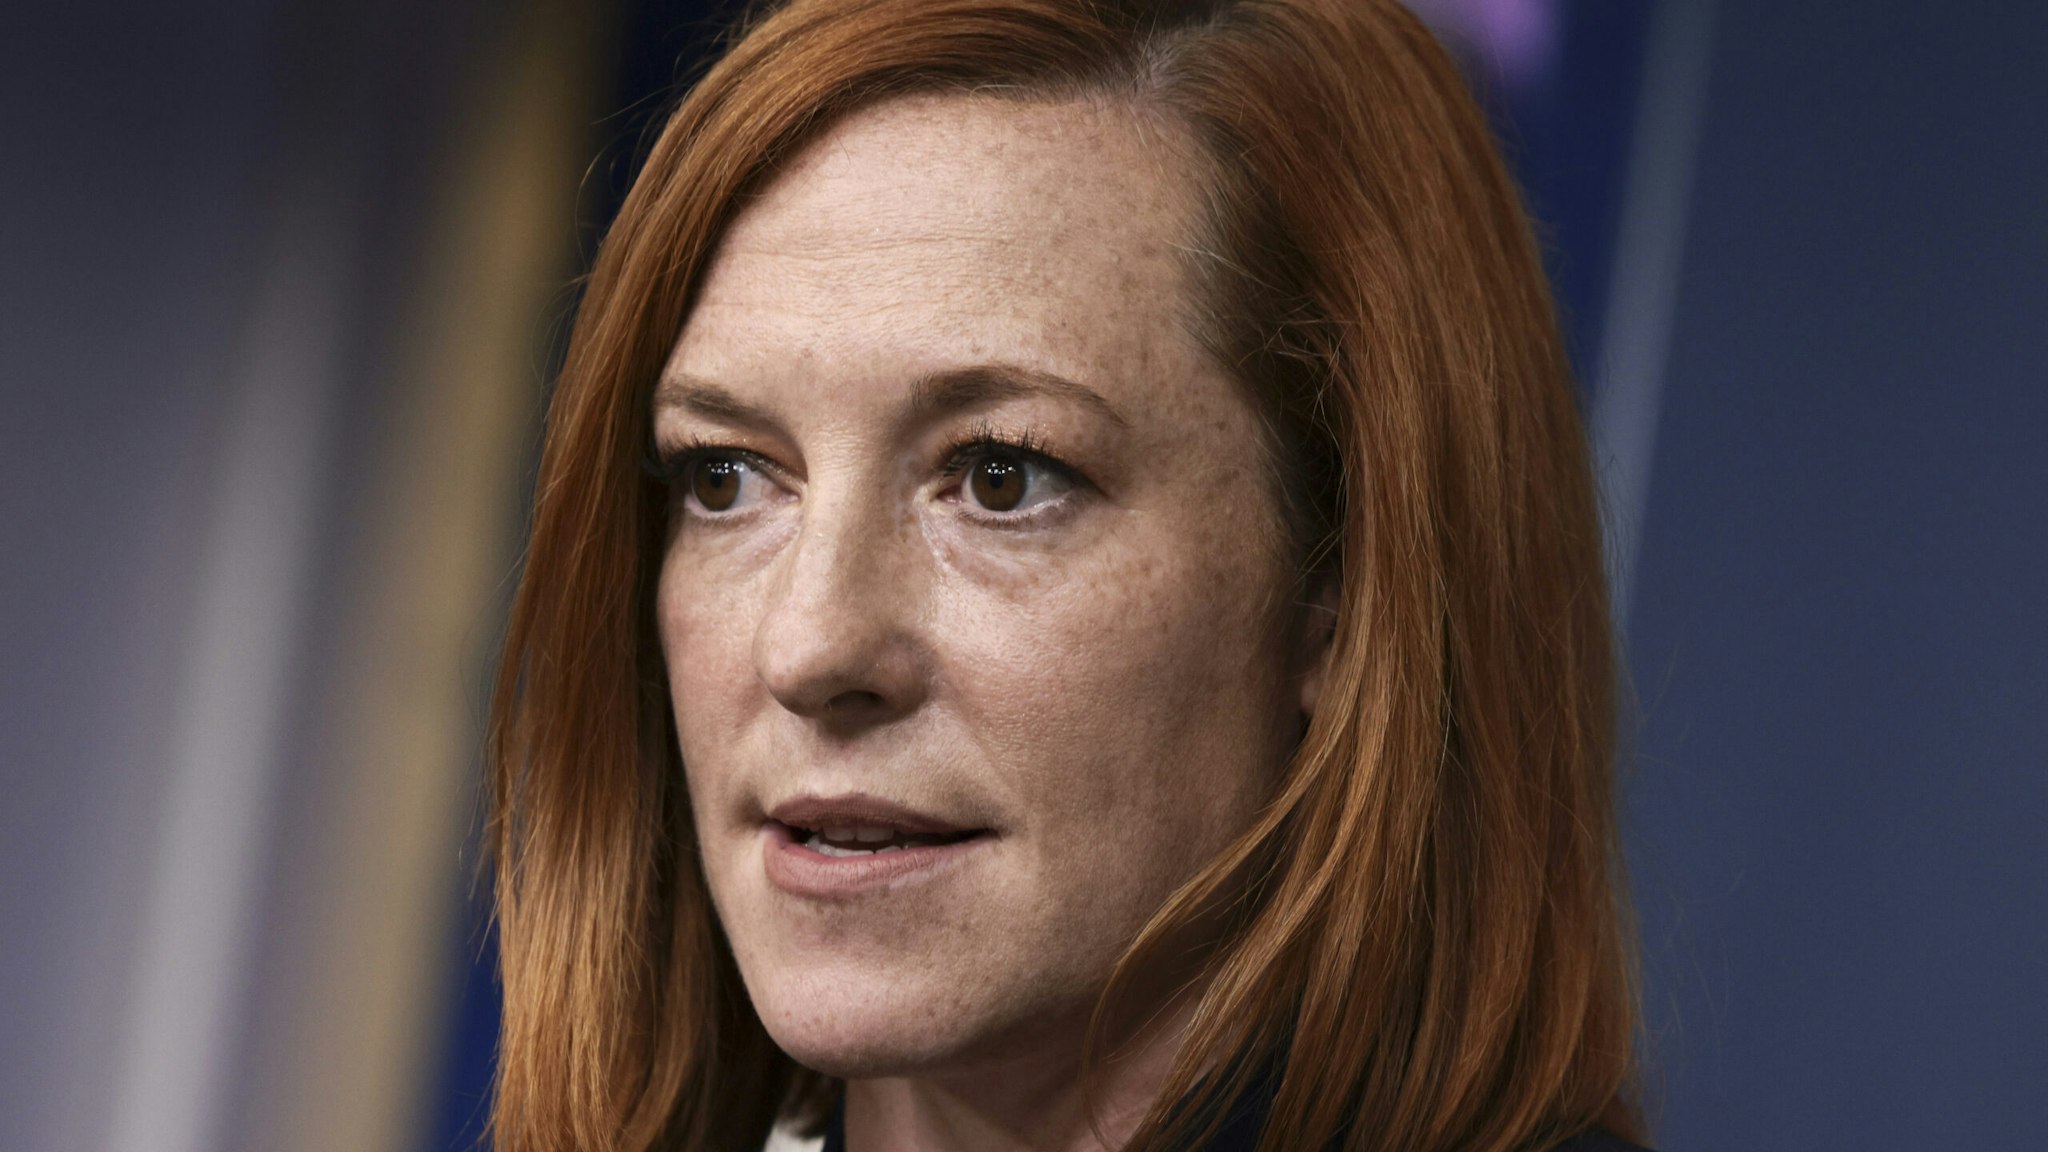 WASHINGTON, DC - SEPTEMBER 24: White House Press Secretary Jen Psaki speaks at a press briefing in the White House on September 24, 2021 in Washington, DC. Psaki spoke on a range of topics including the Covid-19 vaccines and the U.S and Mexico border.